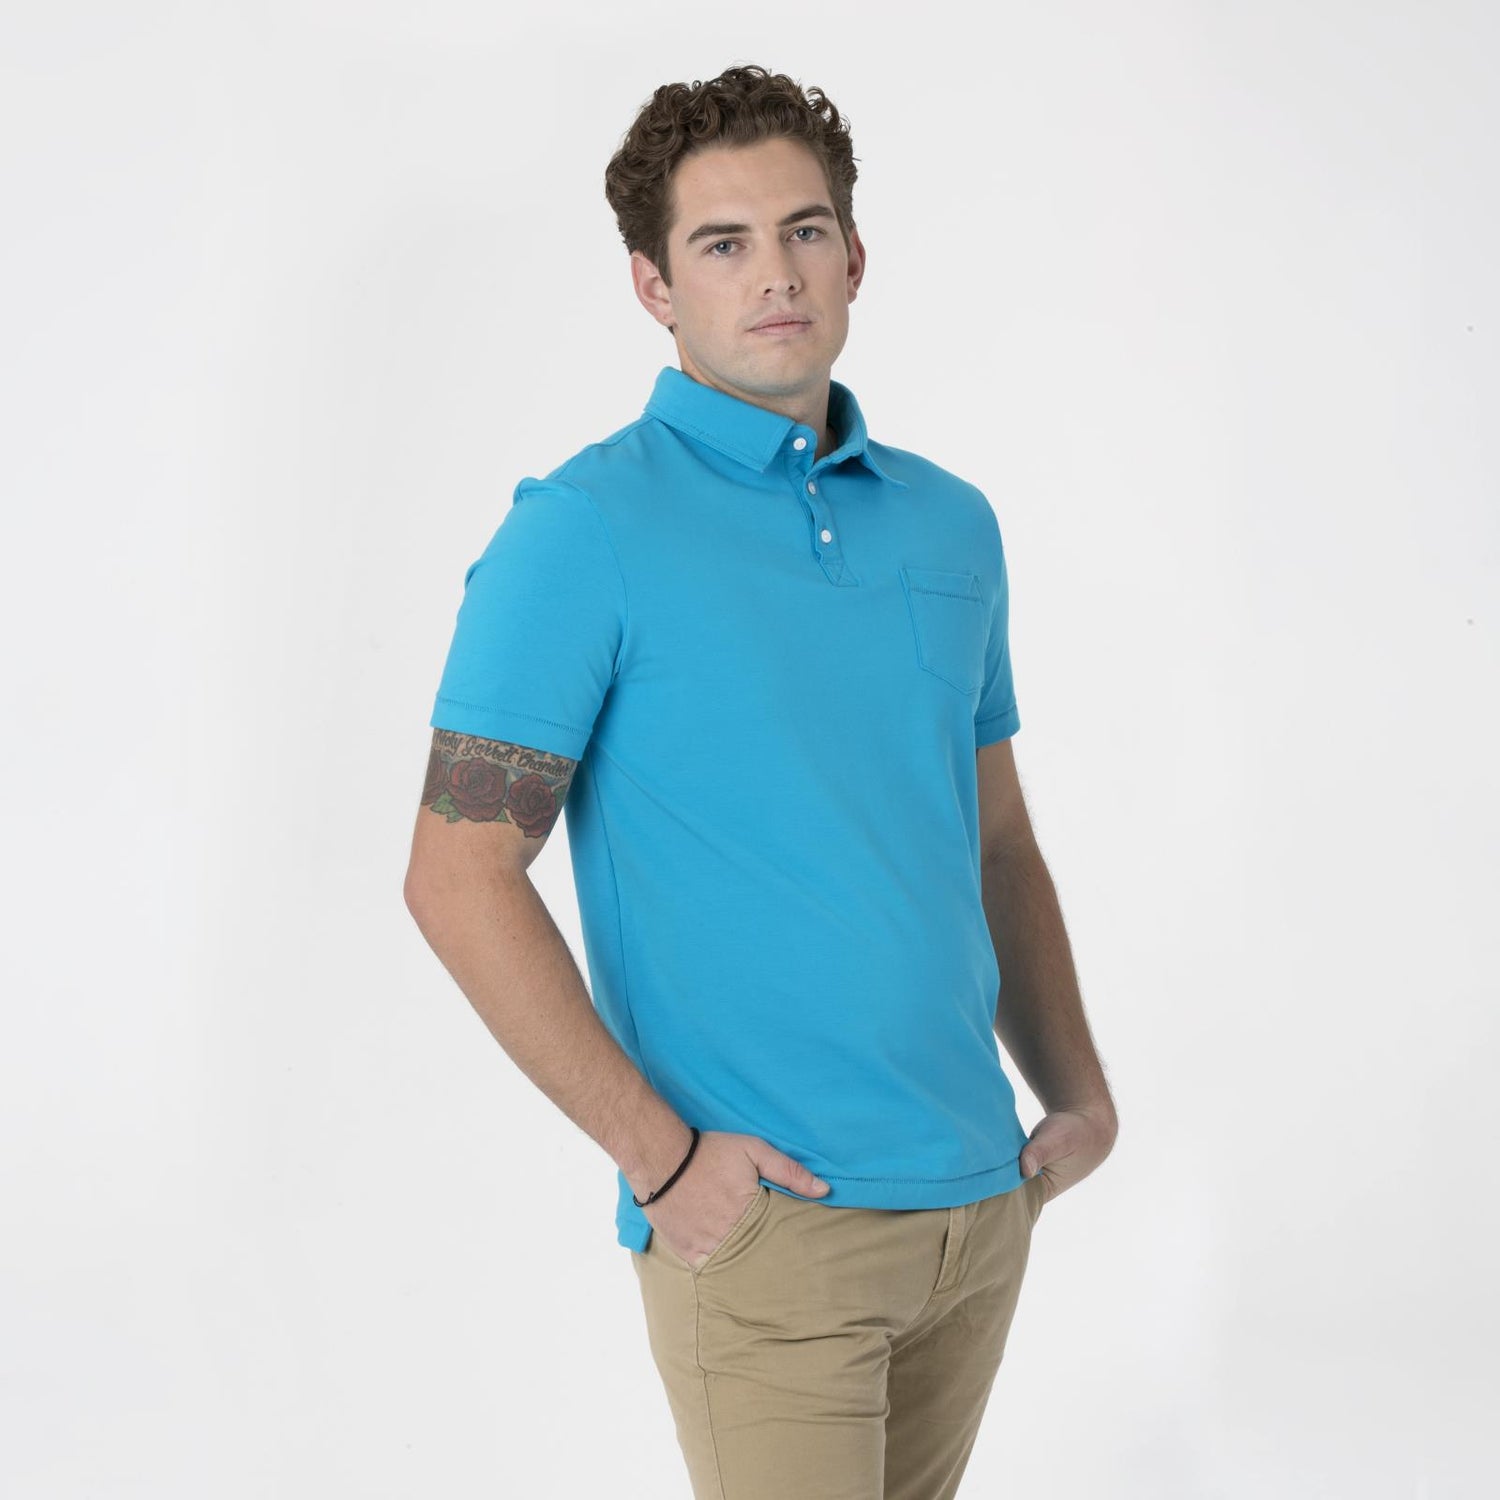 Men's Short Sleeve Luxe Jersey Polo with Pocket in Amazon